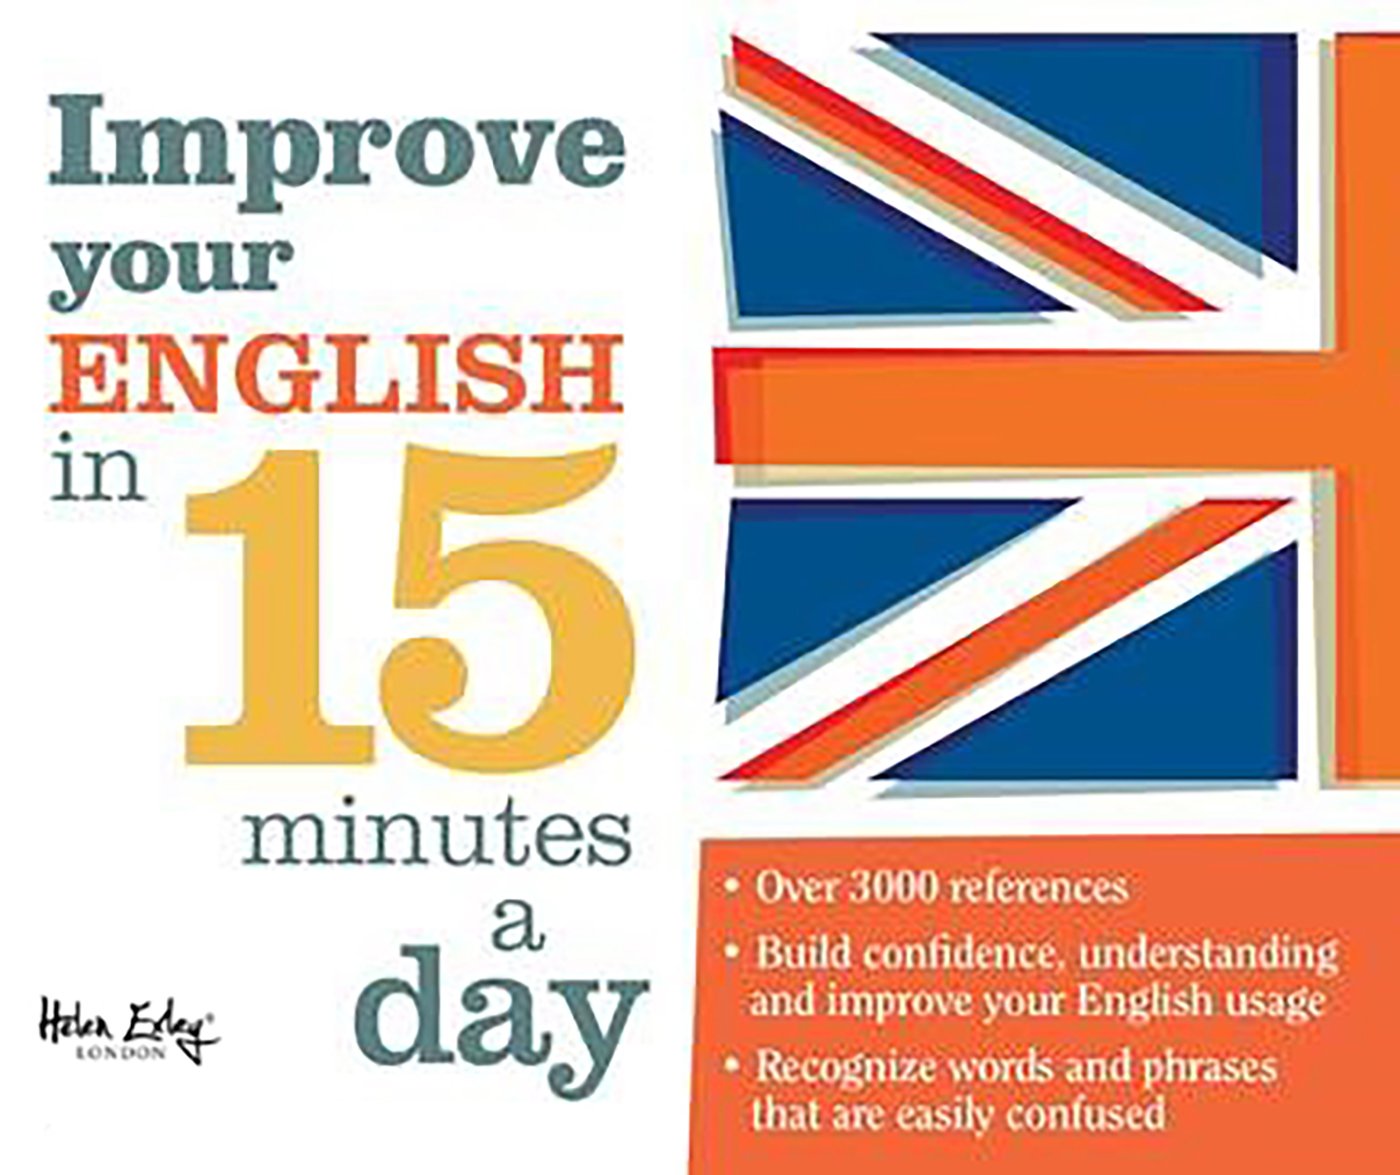 Improve your english in 15 minutes a day